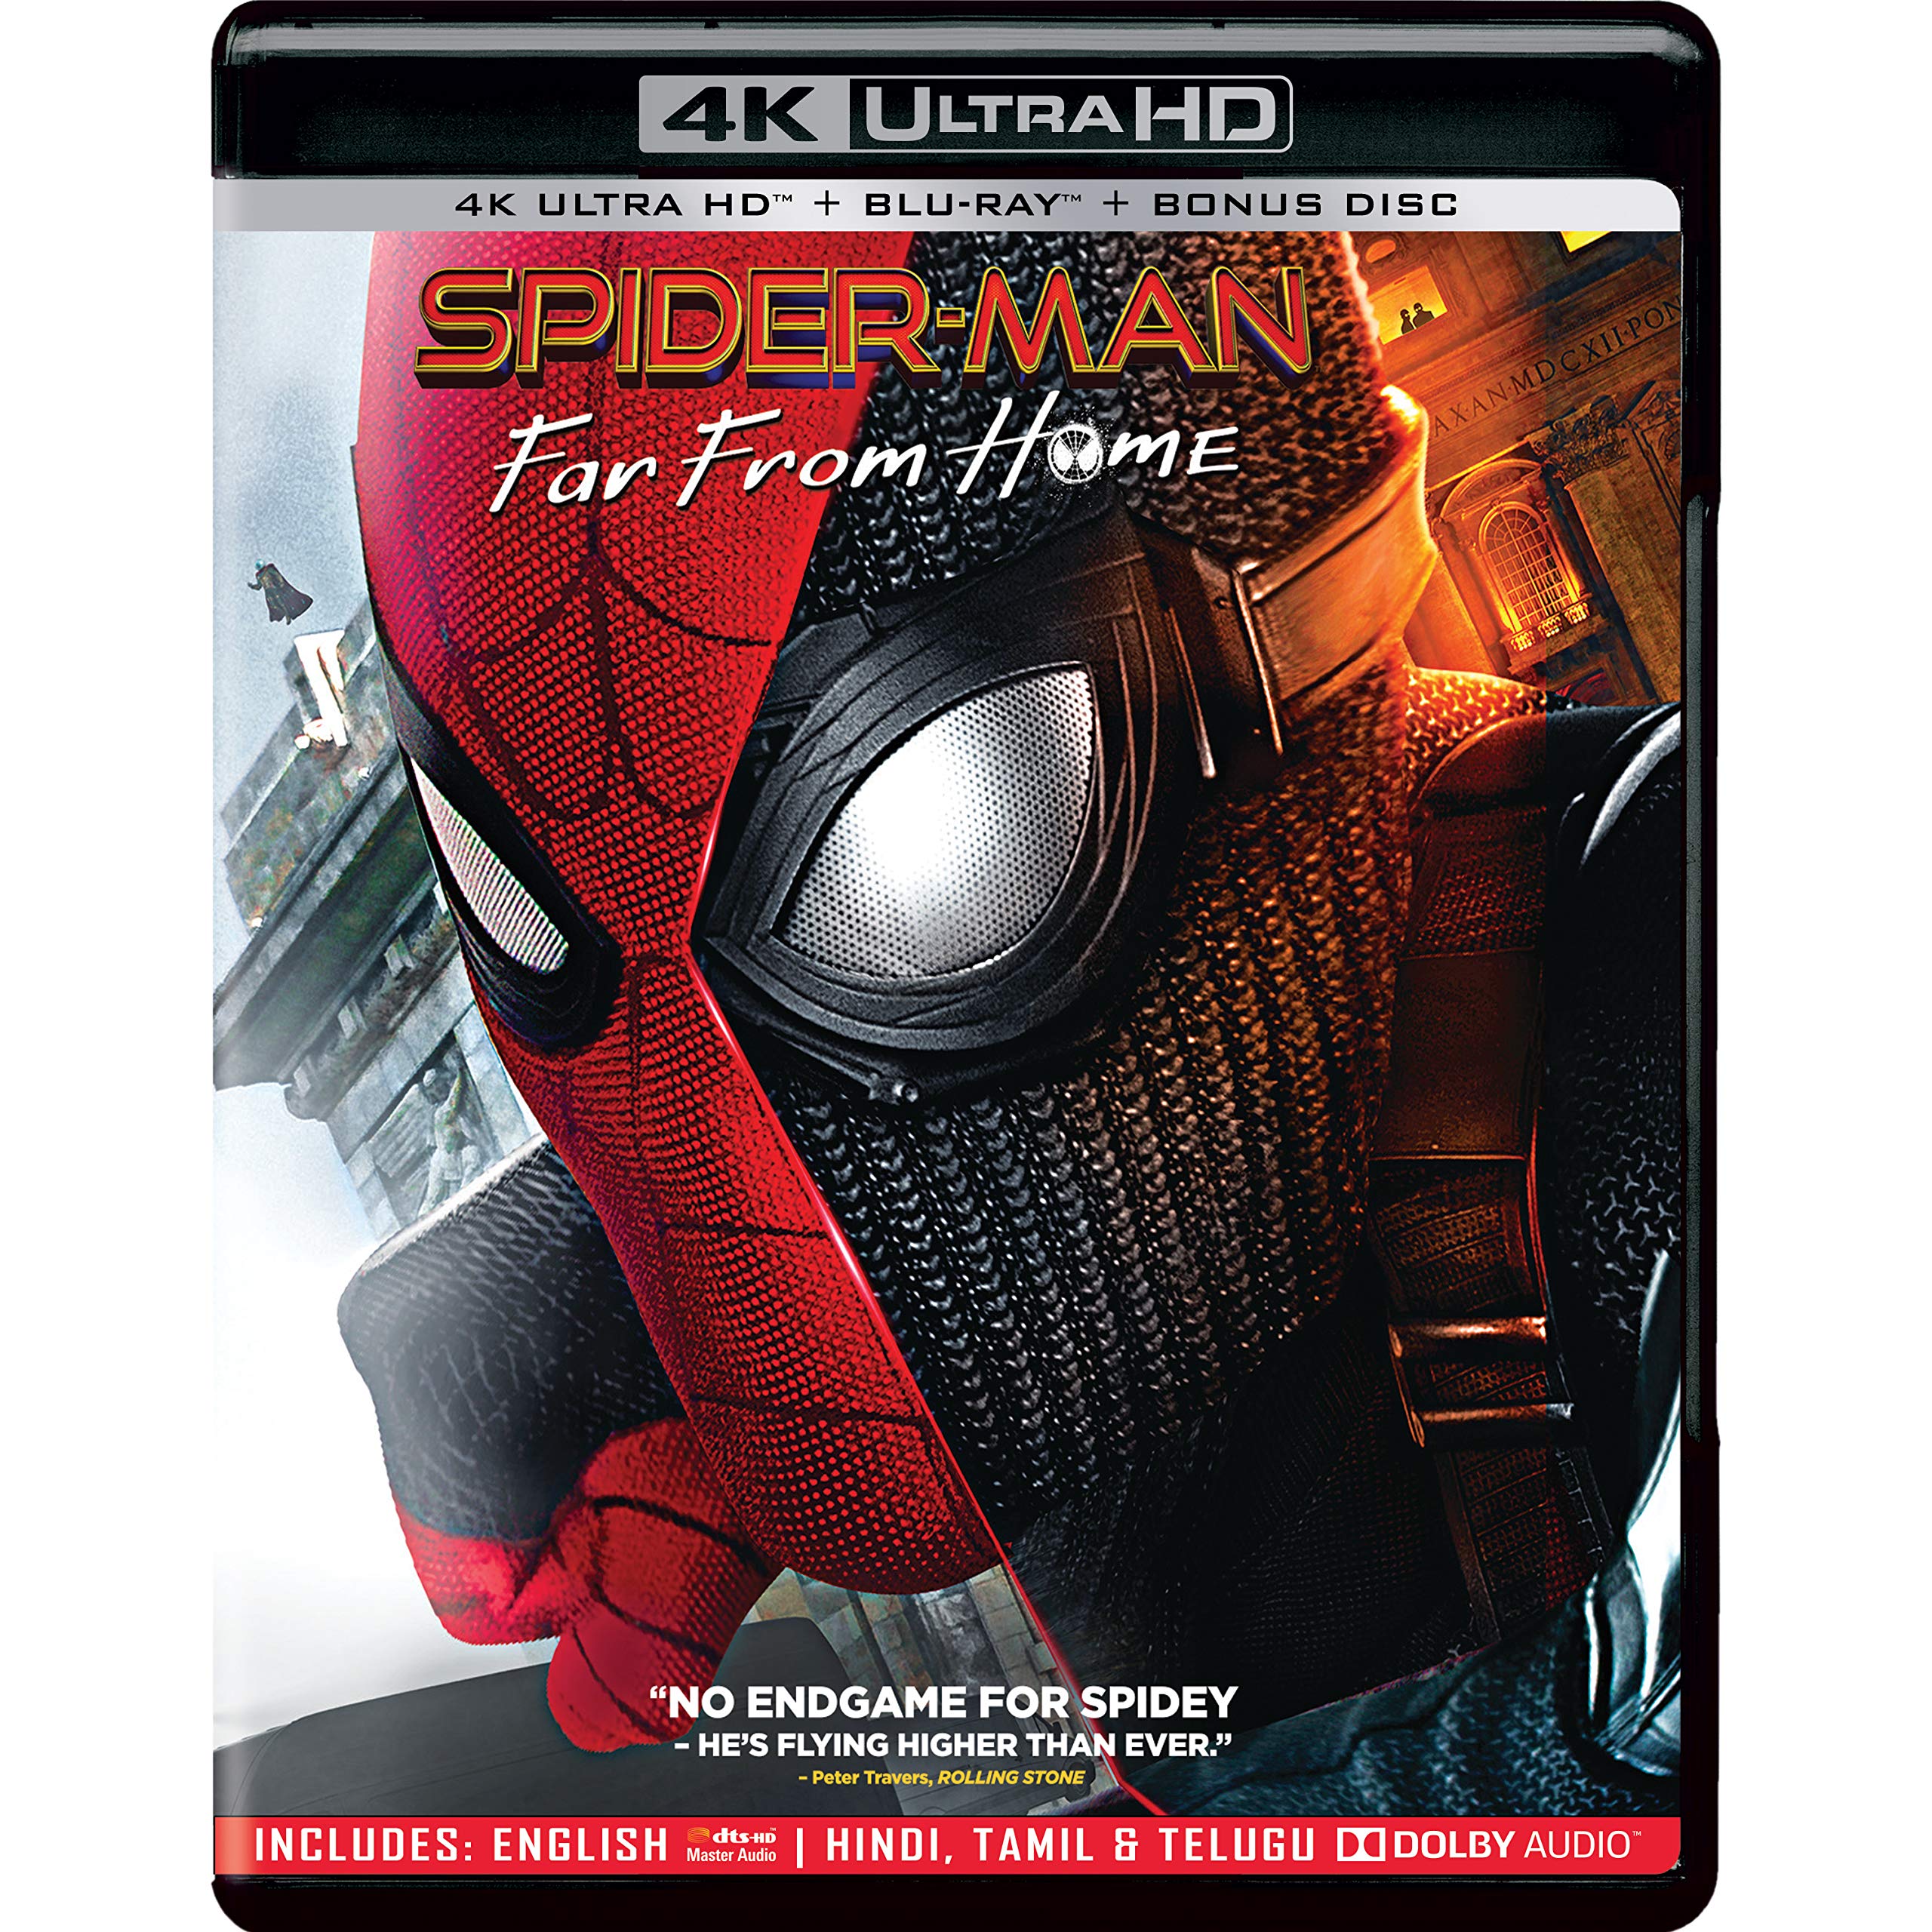 spider-man-far-from-home-4k-uhd-hd-2-disc-movie-purchase-or-wat